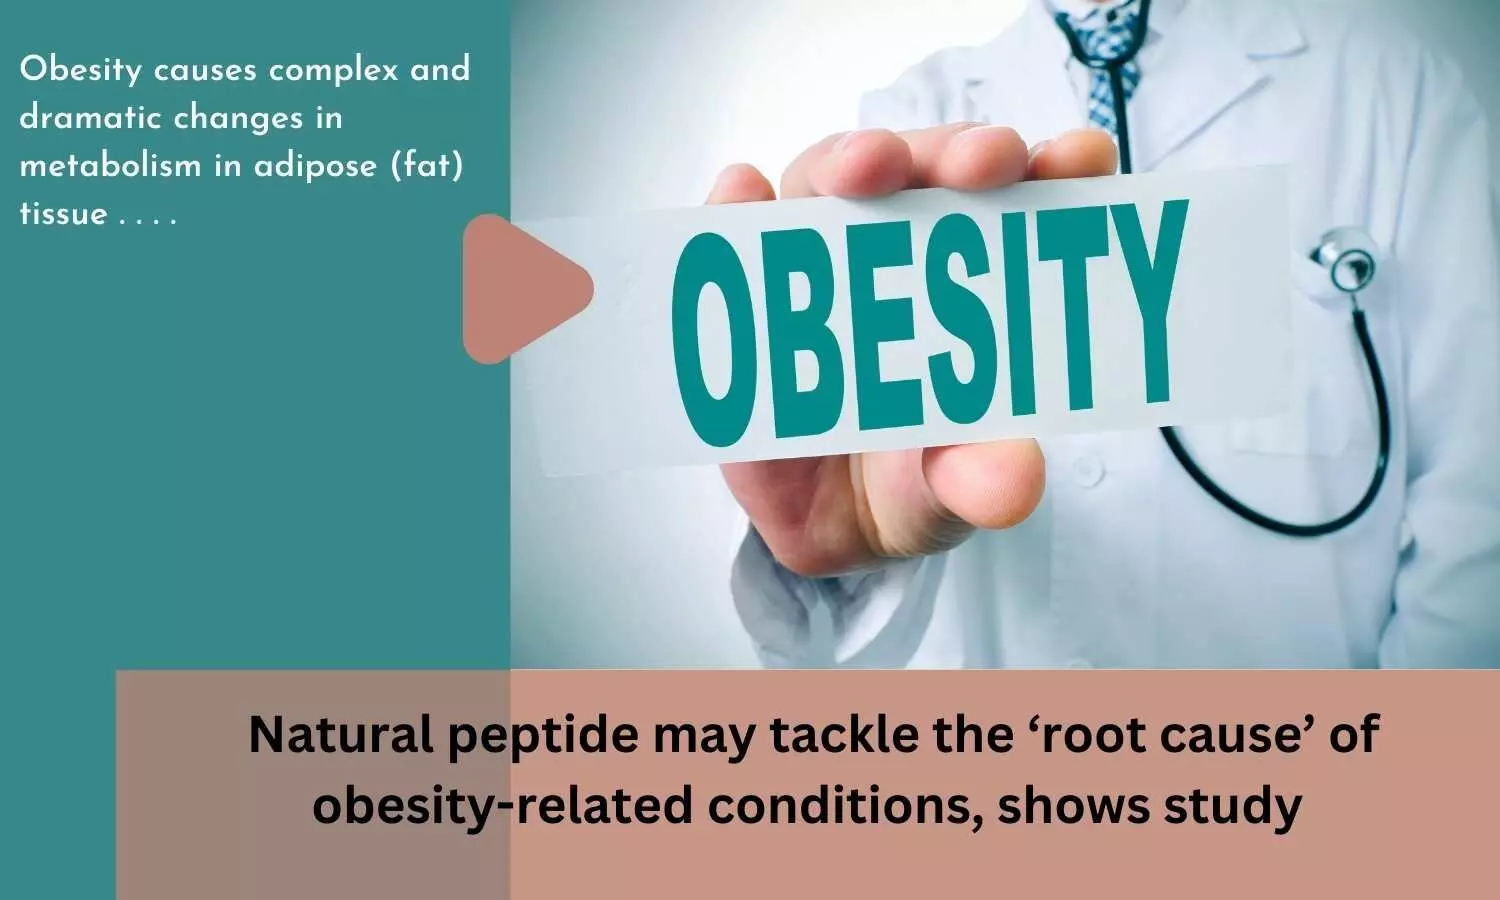 Natural peptide may tackle the root cause of obesity-related conditions, shows study